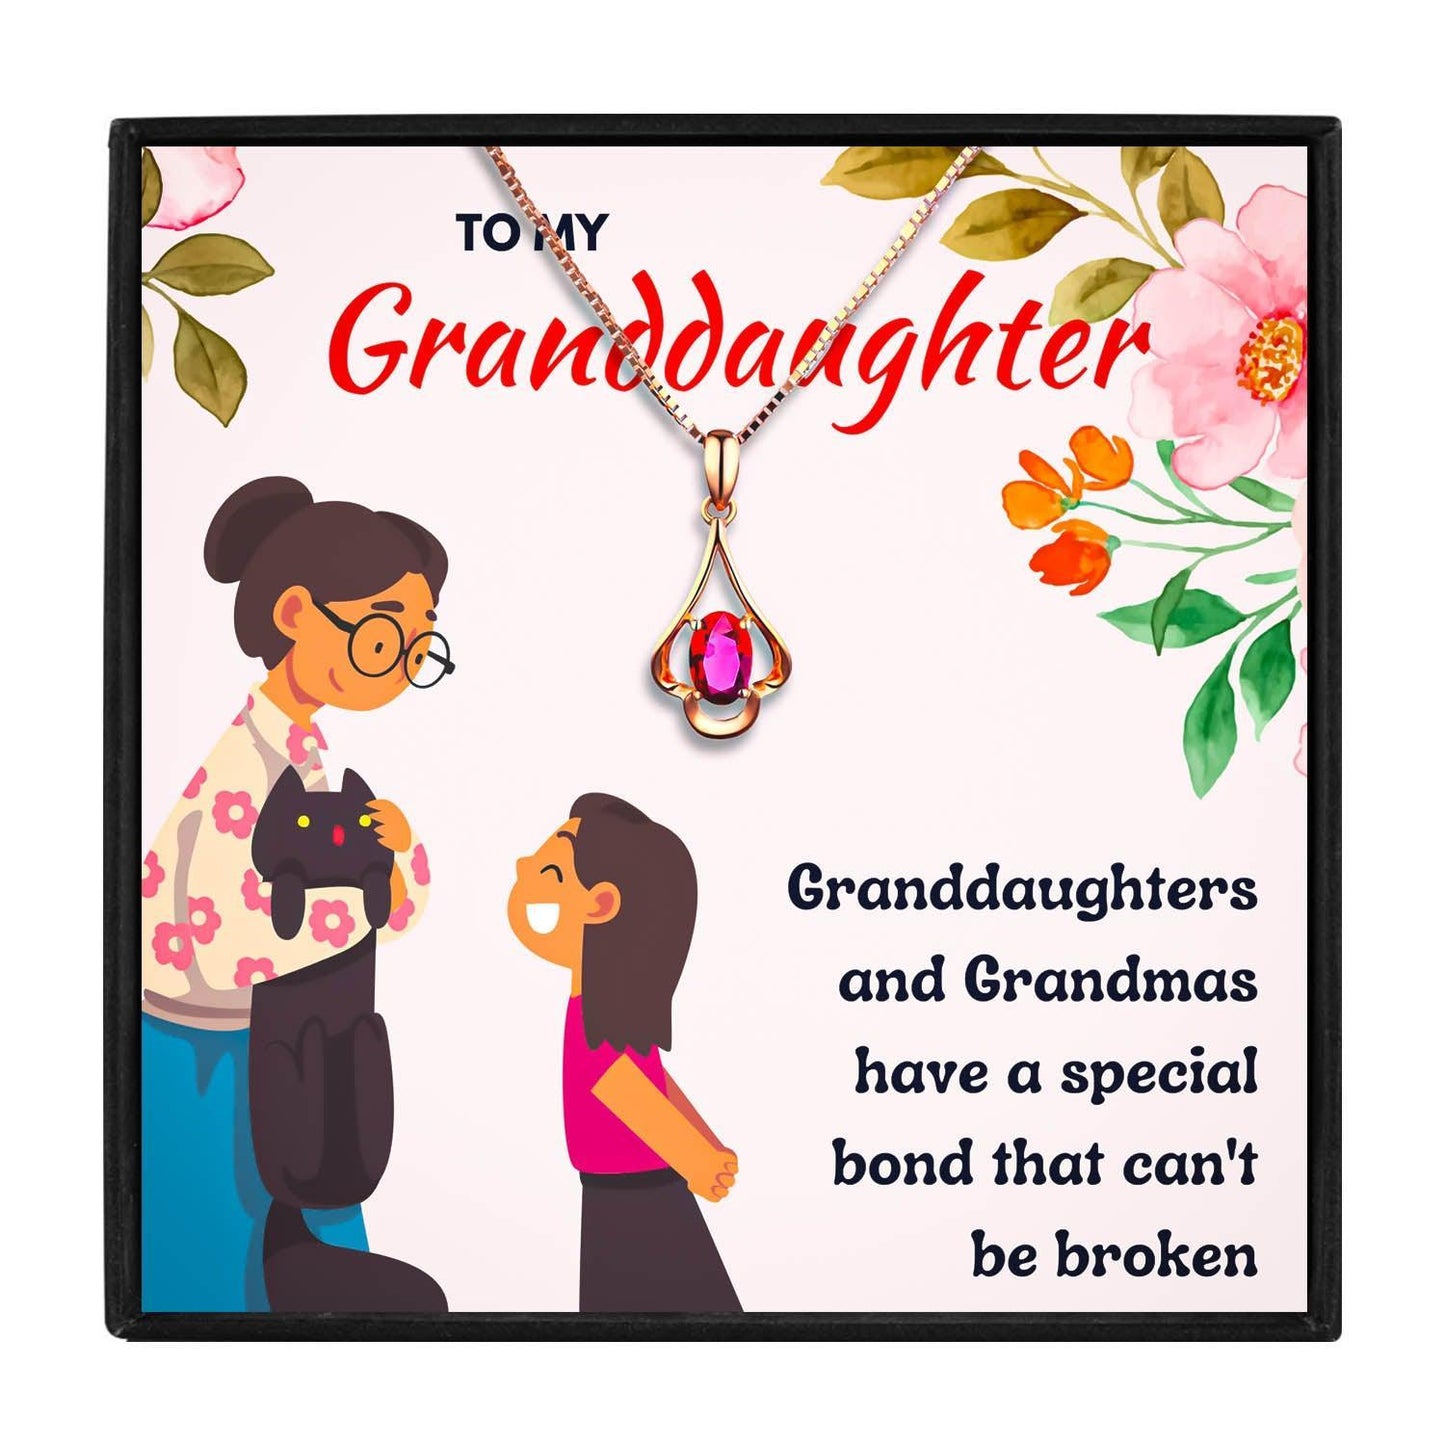 Heartfelt Gifts For Granddaughter From Nana for Christmas 2023 | Heartfelt Gifts For Granddaughter From Nana - undefined | granddaughter gift, granddaughter gifts from nana, Granddaughter Necklace, great granddaughter gifts, jewelry for granddaughter from grandmother | From Hunny Life | hunnylife.com